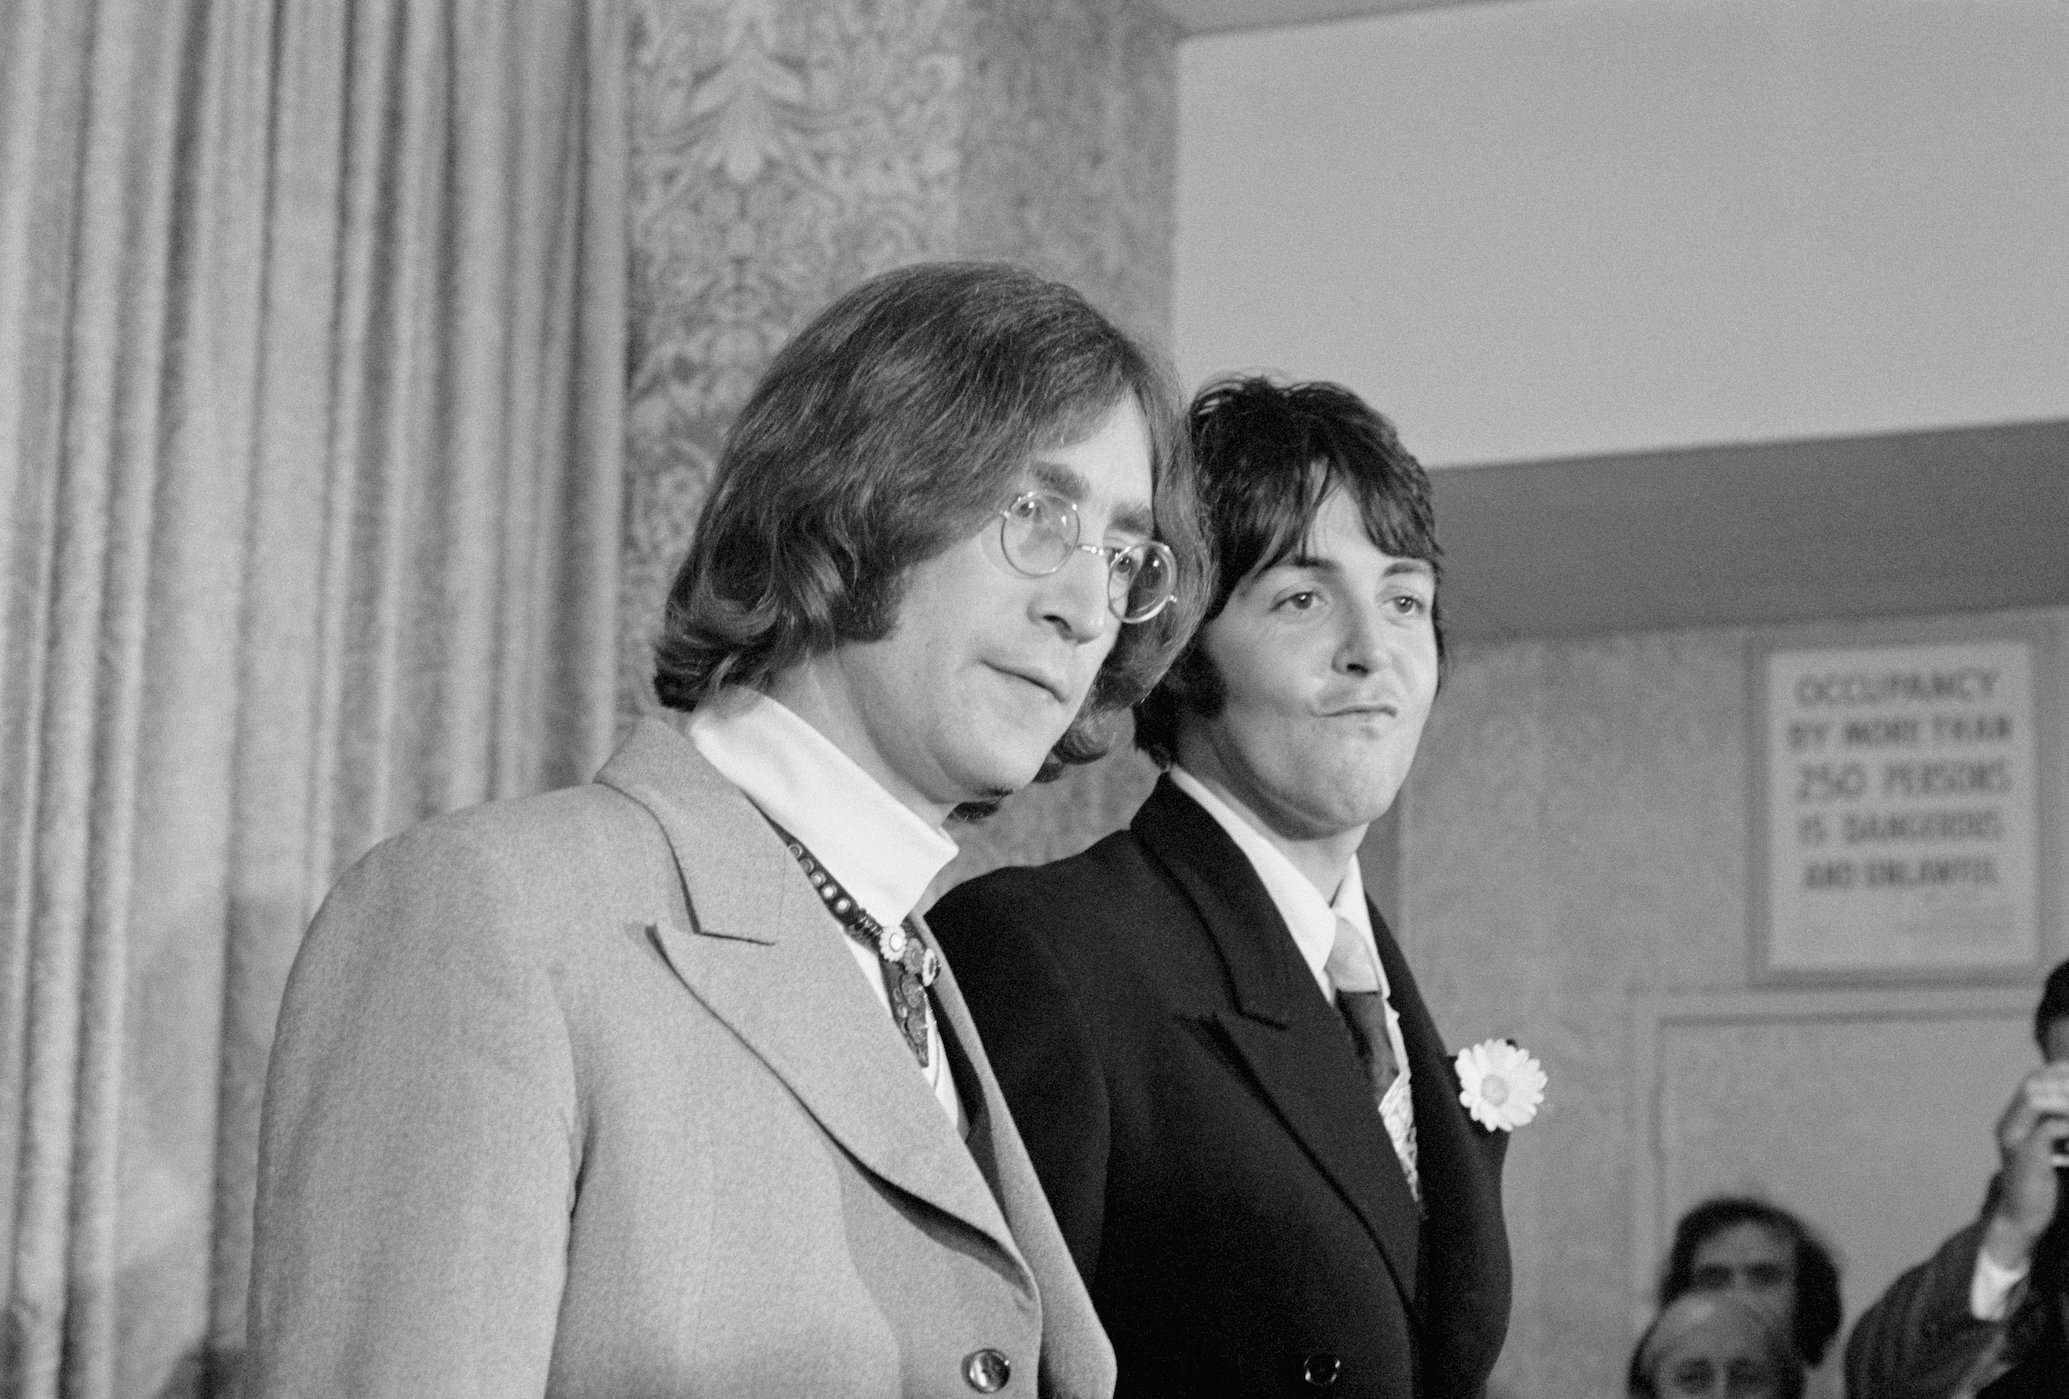 John Lennon and Paul McCartney of The Beatles attend a press conference for Apple Corps.